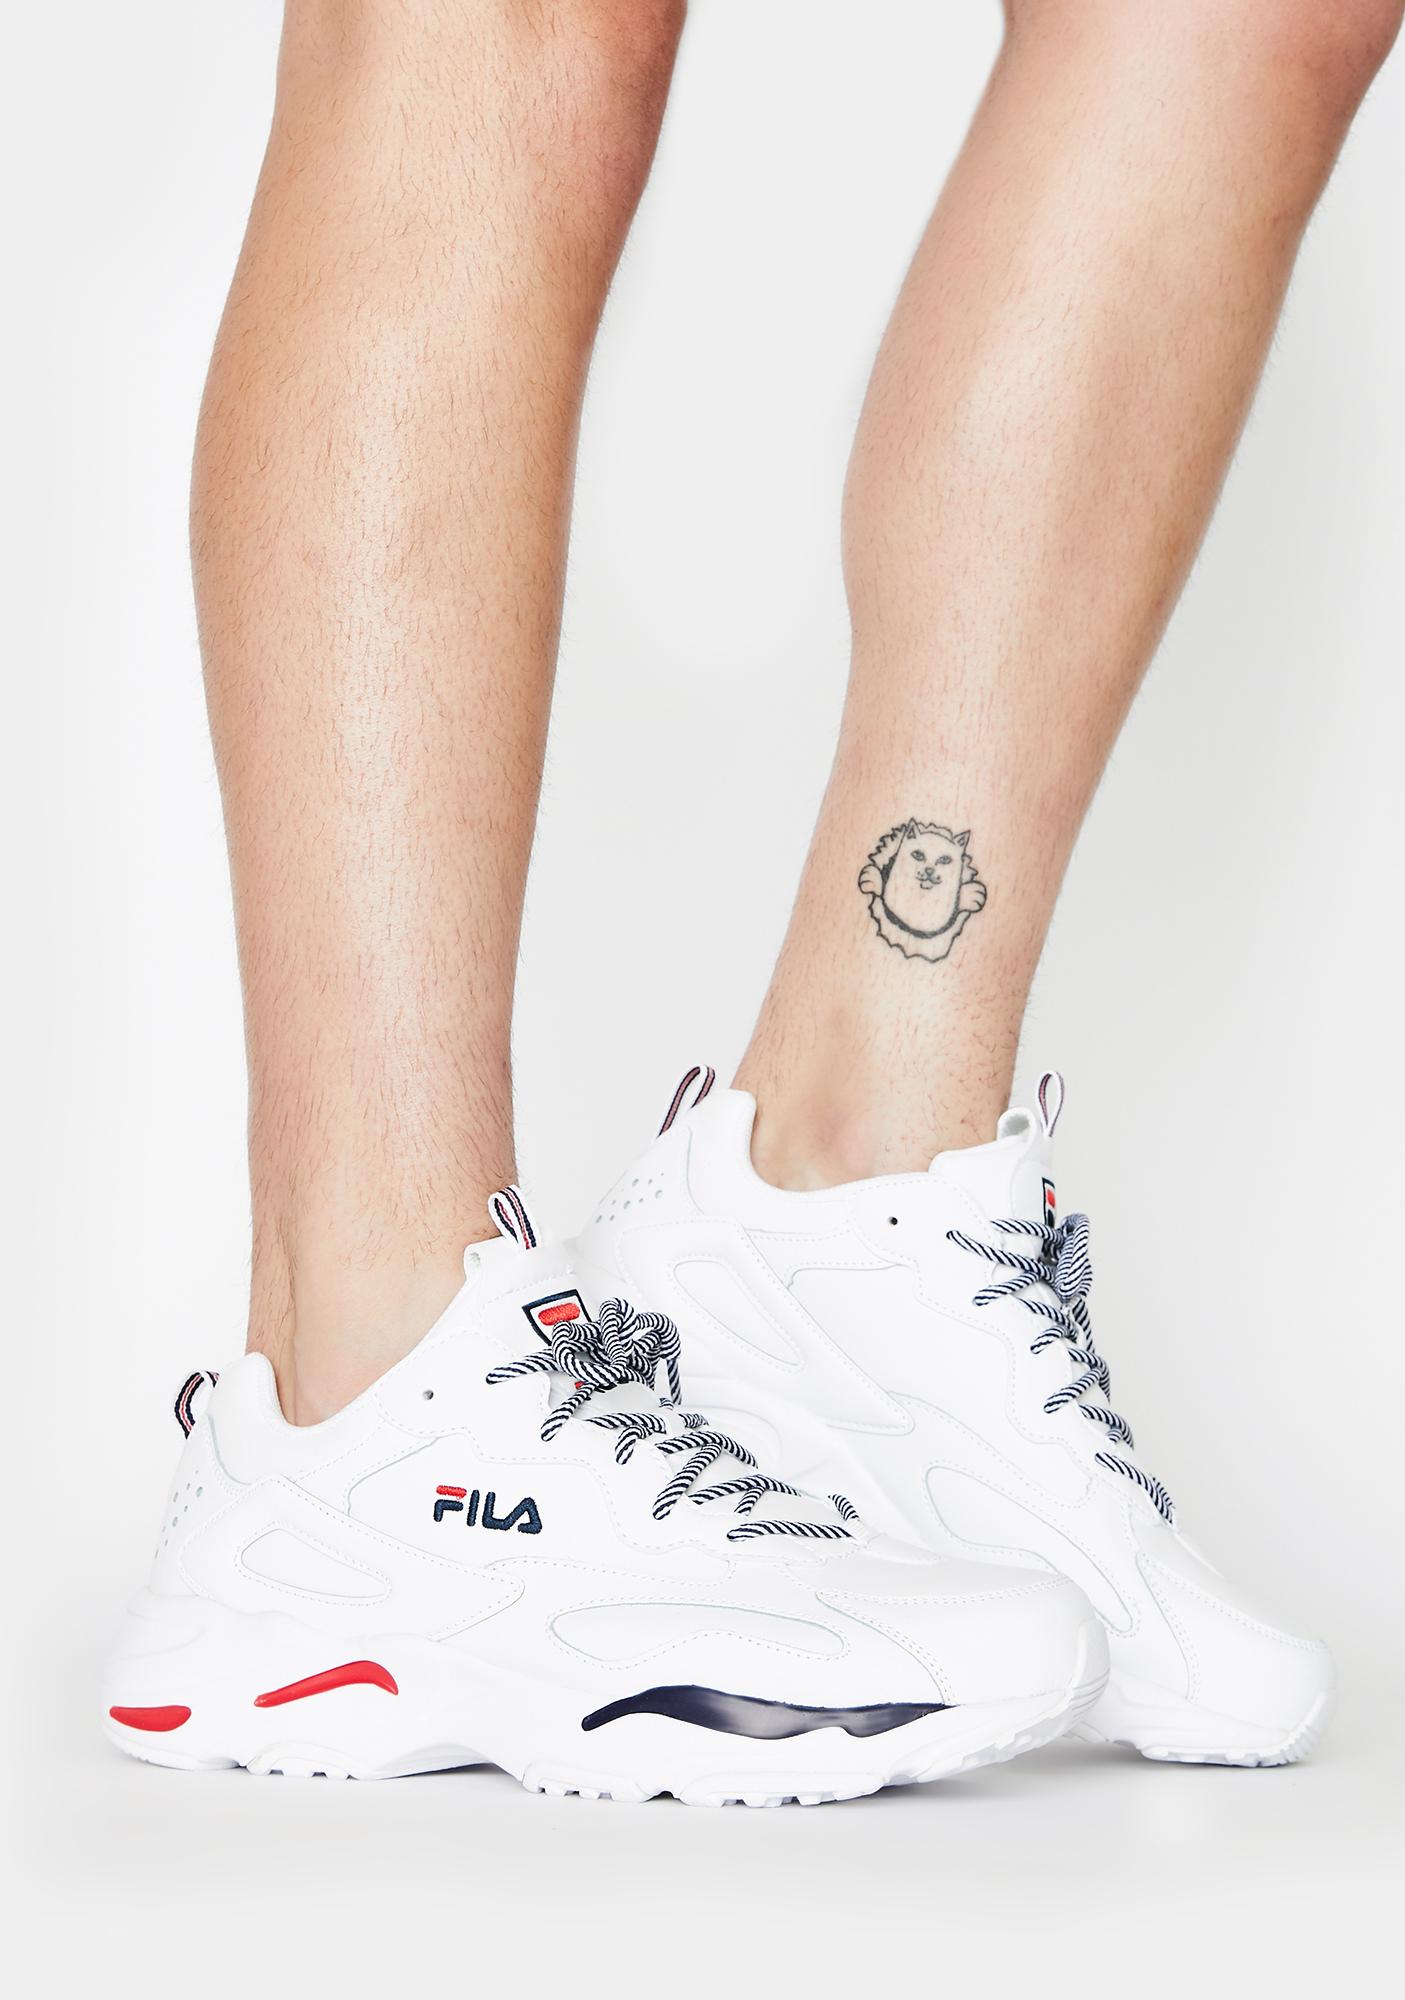 fila ray tracer white grey lime